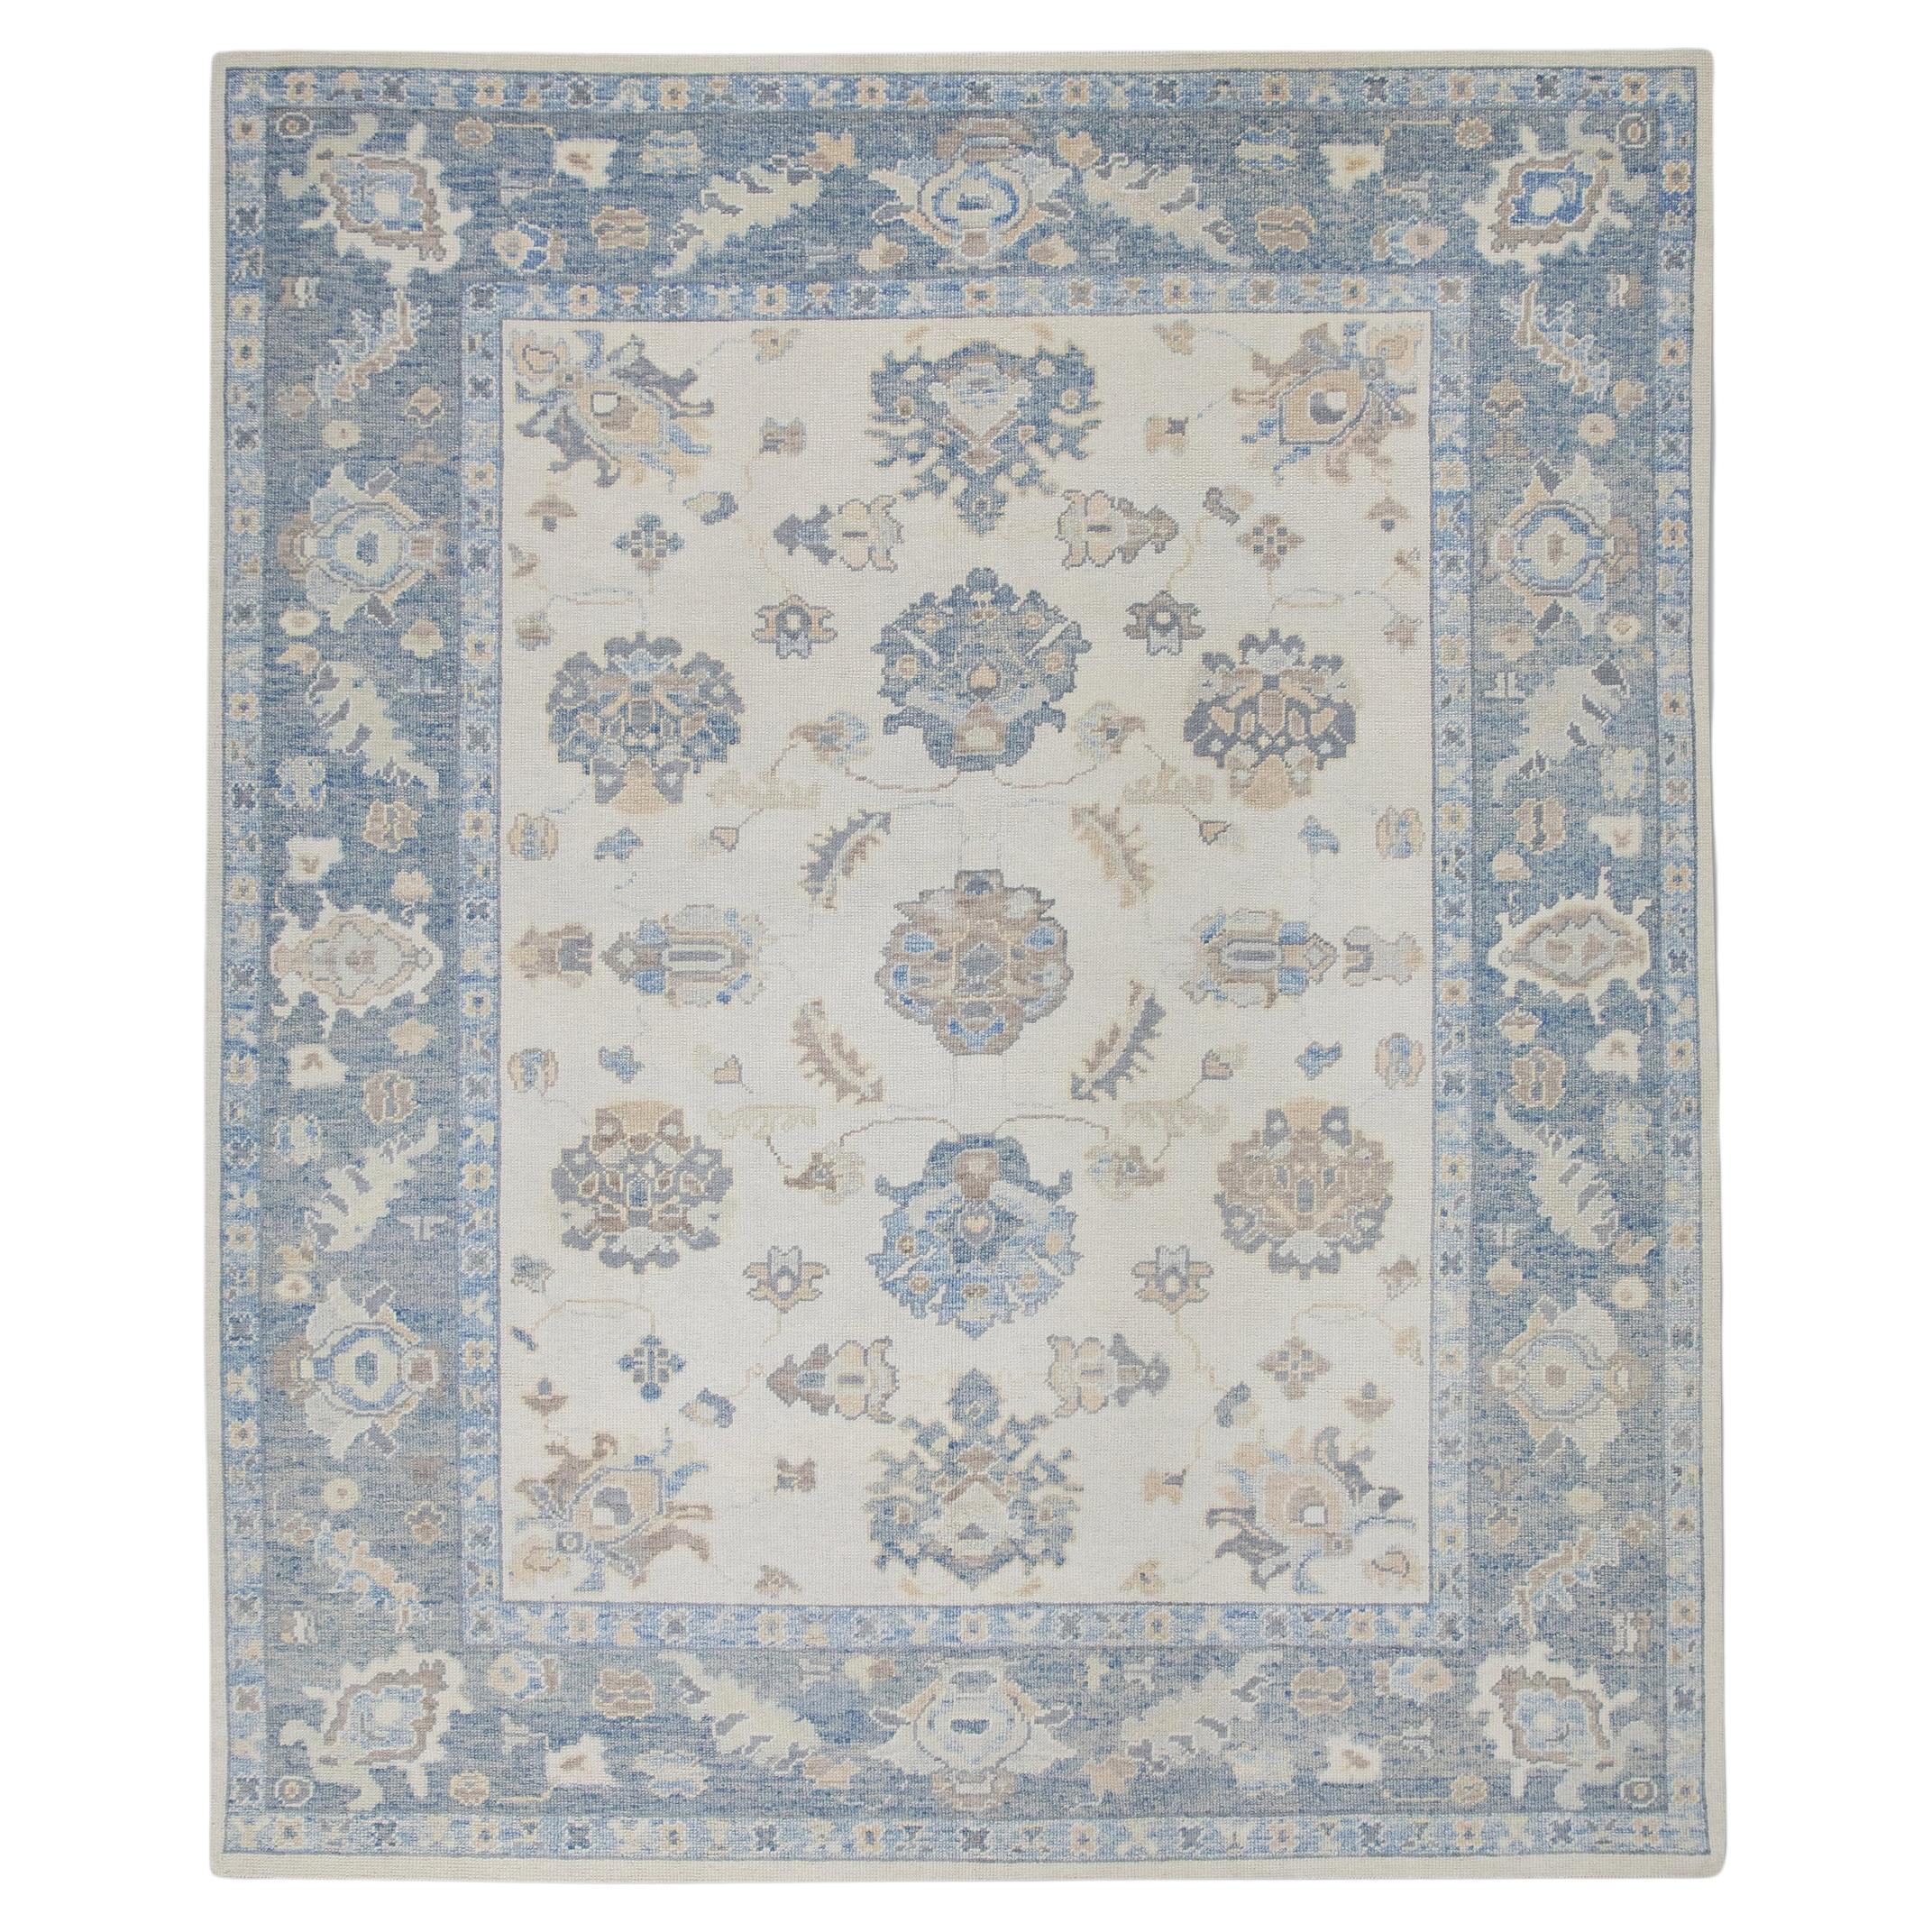 Cream & Blue Handwoven Wool Turkish Oushak Rug in Floral Design 8'5" x 9'11" For Sale